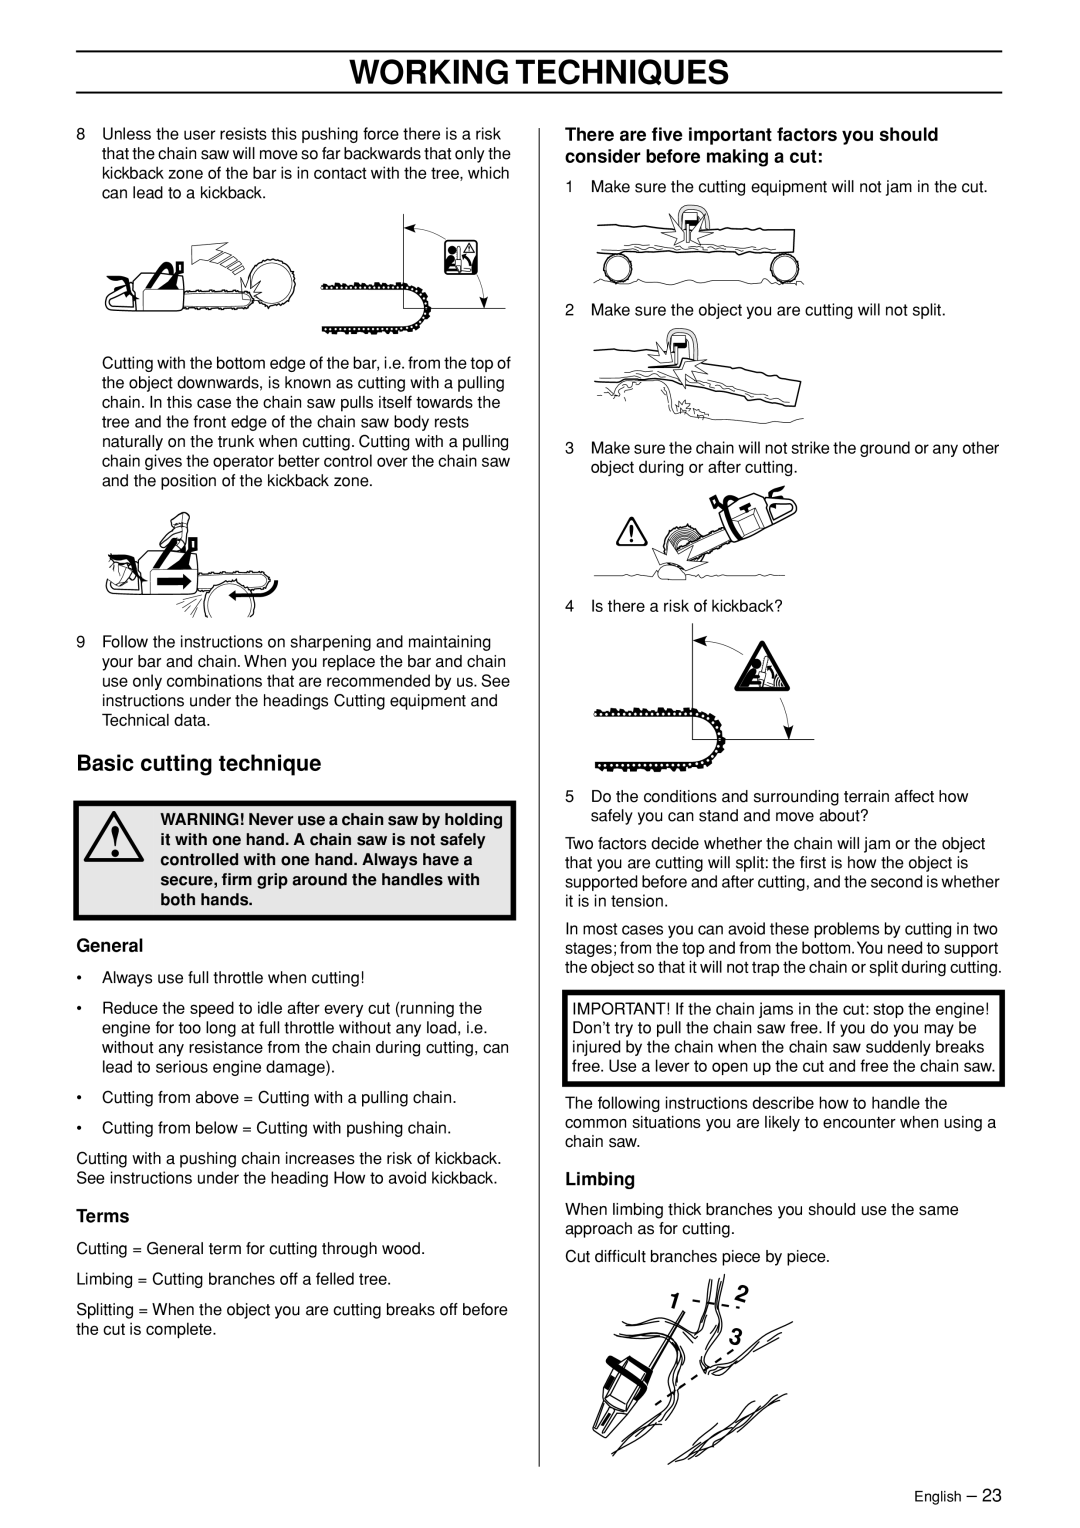 Husqvarna 345e manual Basic cutting technique, General, Terms, Limbing, WARNING! Never use a chain saw by holding 